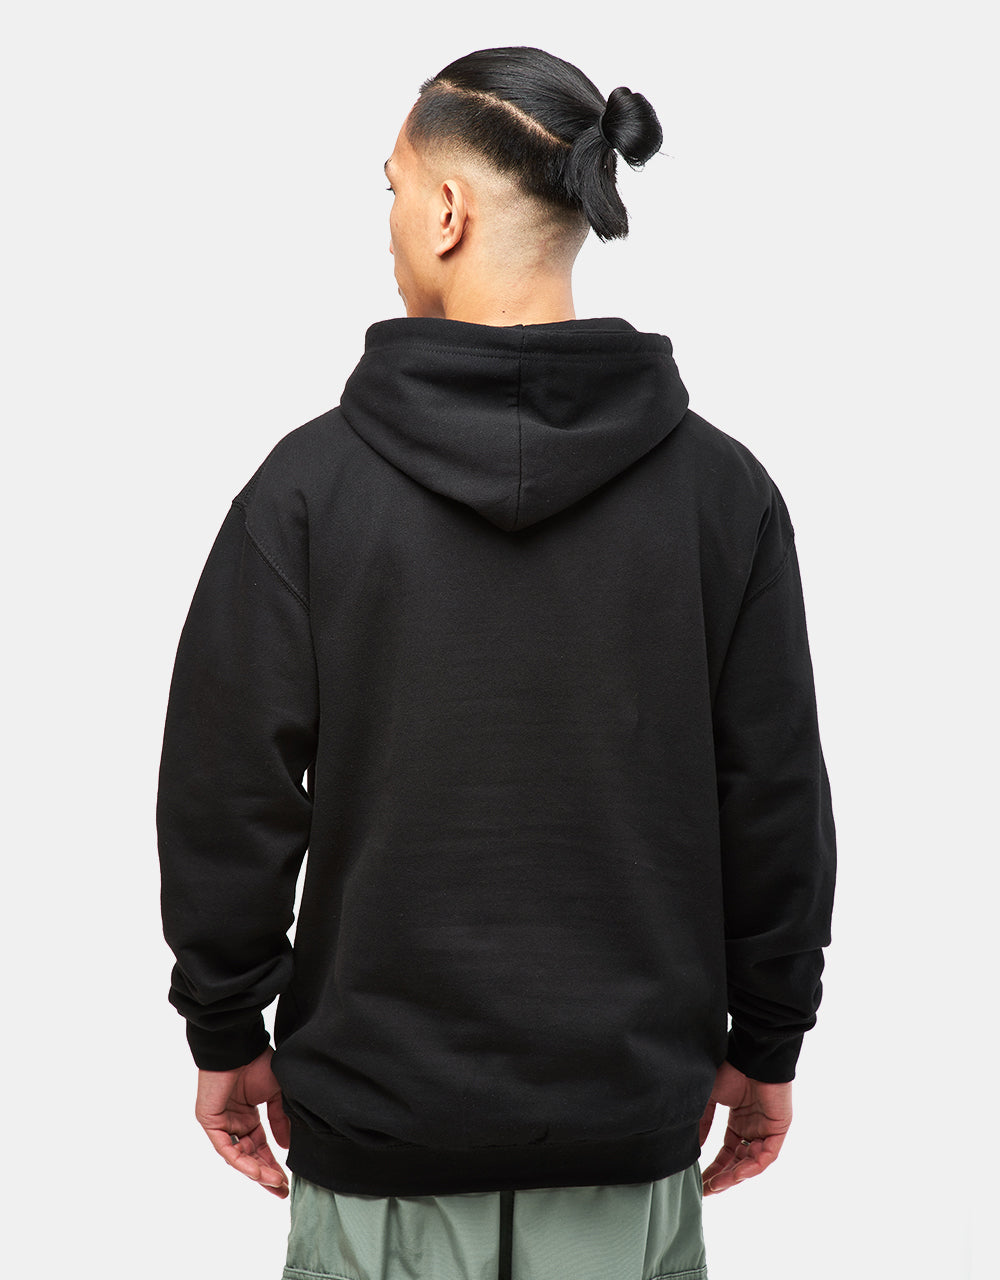 Chocolate 94 Embroidered Script Pullover Hoodie - Black